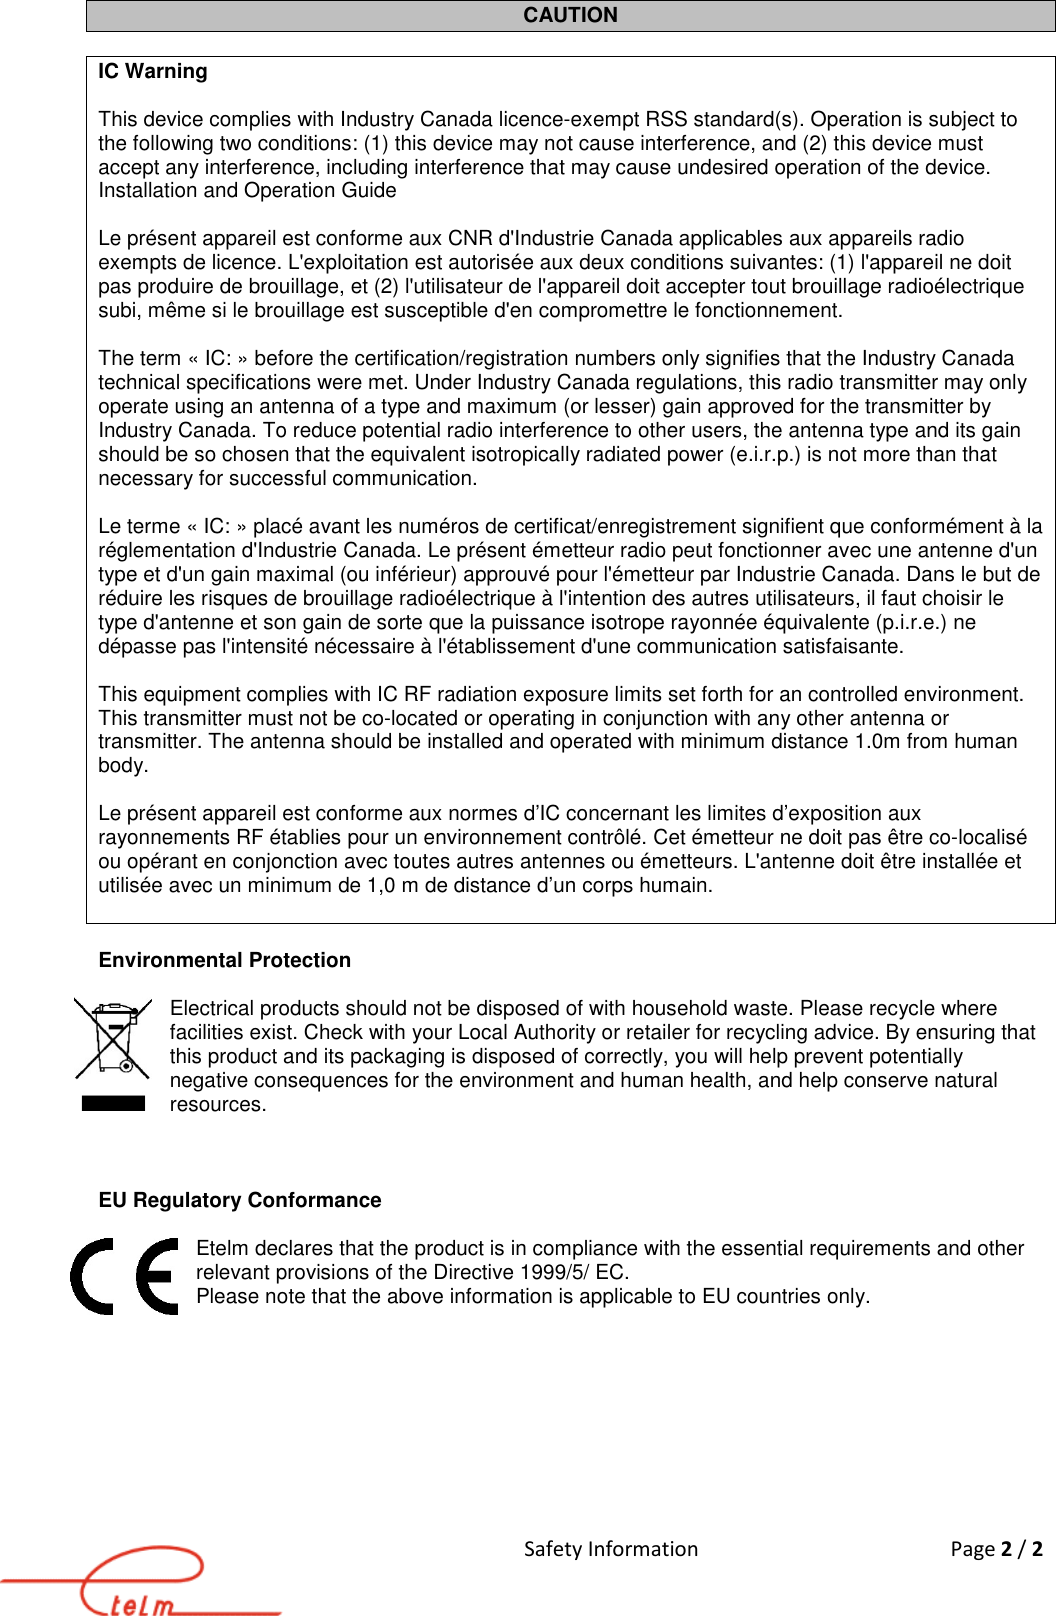 Safety Information  Page 2 / 2  CAUTION  IC Warning   This device complies with Industry Canada licence-exempt RSS standard(s). Operation is subject to the following two conditions: (1) this device may not cause interference, and (2) this device must accept any interference, including interference that may cause undesired operation of the device. Installation and Operation Guide  Le présent appareil est conforme aux CNR d&apos;Industrie Canada applicables aux appareils radio exempts de licence. L&apos;exploitation est autorisée aux deux conditions suivantes: (1) l&apos;appareil ne doit pas produire de brouillage, et (2) l&apos;utilisateur de l&apos;appareil doit accepter tout brouillage radioélectrique subi, même si le brouillage est susceptible d&apos;en compromettre le fonctionnement.  The term « IC: » before the certification/registration numbers only signifies that the Industry Canada technical specifications were met. Under Industry Canada regulations, this radio transmitter may only operate using an antenna of a type and maximum (or lesser) gain approved for the transmitter by Industry Canada. To reduce potential radio interference to other users, the antenna type and its gain should be so chosen that the equivalent isotropically radiated power (e.i.r.p.) is not more than that necessary for successful communication.  Le terme « IC: » placé avant les numéros de certificat/enregistrement signifient que conformément à la réglementation d&apos;Industrie Canada. Le présent émetteur radio peut fonctionner avec une antenne d&apos;un type et d&apos;un gain maximal (ou inférieur) approuvé pour l&apos;émetteur par Industrie Canada. Dans le but de réduire les risques de brouillage radioélectrique à l&apos;intention des autres utilisateurs, il faut choisir le type d&apos;antenne et son gain de sorte que la puissance isotrope rayonnée équivalente (p.i.r.e.) ne dépasse pas l&apos;intensité nécessaire à l&apos;établissement d&apos;une communication satisfaisante.  This equipment complies with IC RF radiation exposure limits set forth for an controlled environment. This transmitter must not be co-located or operating in conjunction with any other antenna or transmitter. The antenna should be installed and operated with minimum distance 1.0m from human body.  Le présent appareil est conforme aux normes d’IC concernant les limites d’exposition aux rayonnements RF établies pour un environnement contrôlé. Cet émetteur ne doit pas être co-localisé ou opérant en conjonction avec toutes autres antennes ou émetteurs. L&apos;antenne doit être installée et utilisée avec un minimum de 1,0 m de distance d’un corps humain.   Environmental Protection  Electrical products should not be disposed of with household waste. Please recycle where facilities exist. Check with your Local Authority or retailer for recycling advice. By ensuring that this product and its packaging is disposed of correctly, you will help prevent potentially negative consequences for the environment and human health, and help conserve natural resources.    EU Regulatory Conformance  Etelm declares that the product is in compliance with the essential requirements and other relevant provisions of the Directive 1999/5/ EC.  Please note that the above information is applicable to EU countries only.  